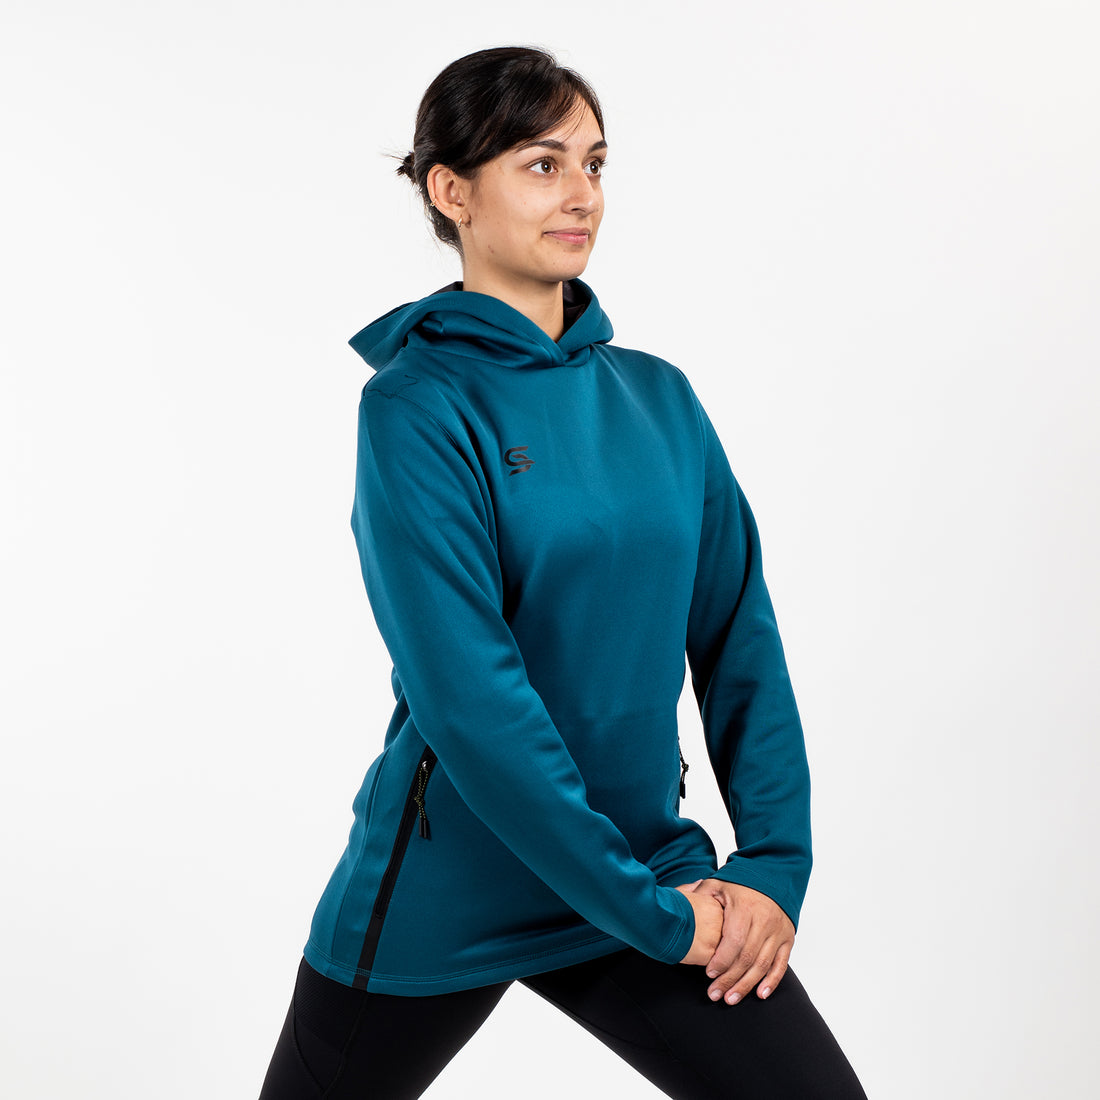 Relay Hoodie | Pullover For Women's | Sports Cartel